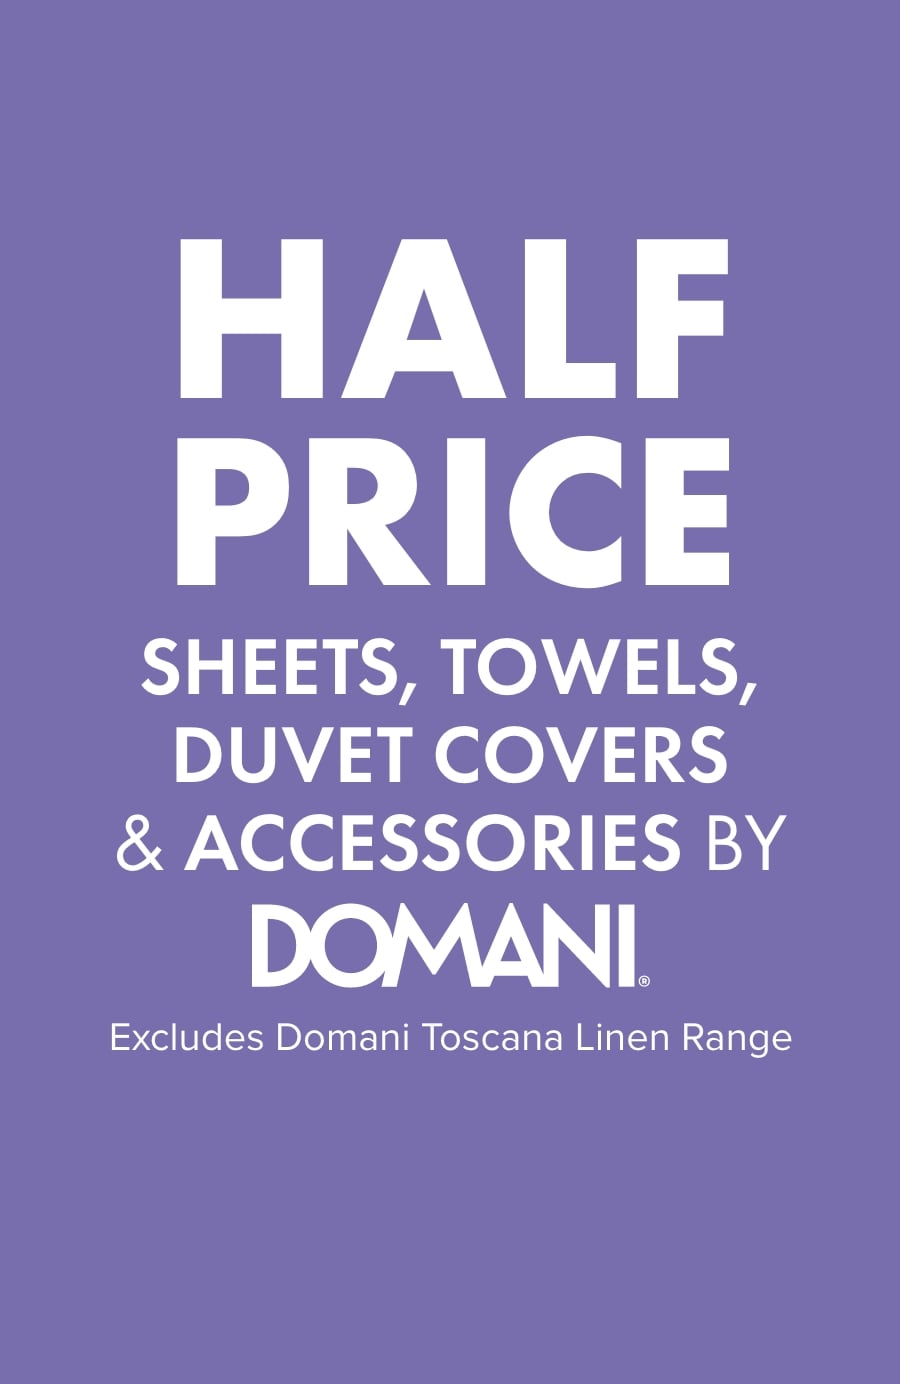 Half Price Sheets Towels, Duvet Covers & Accessories by Domani